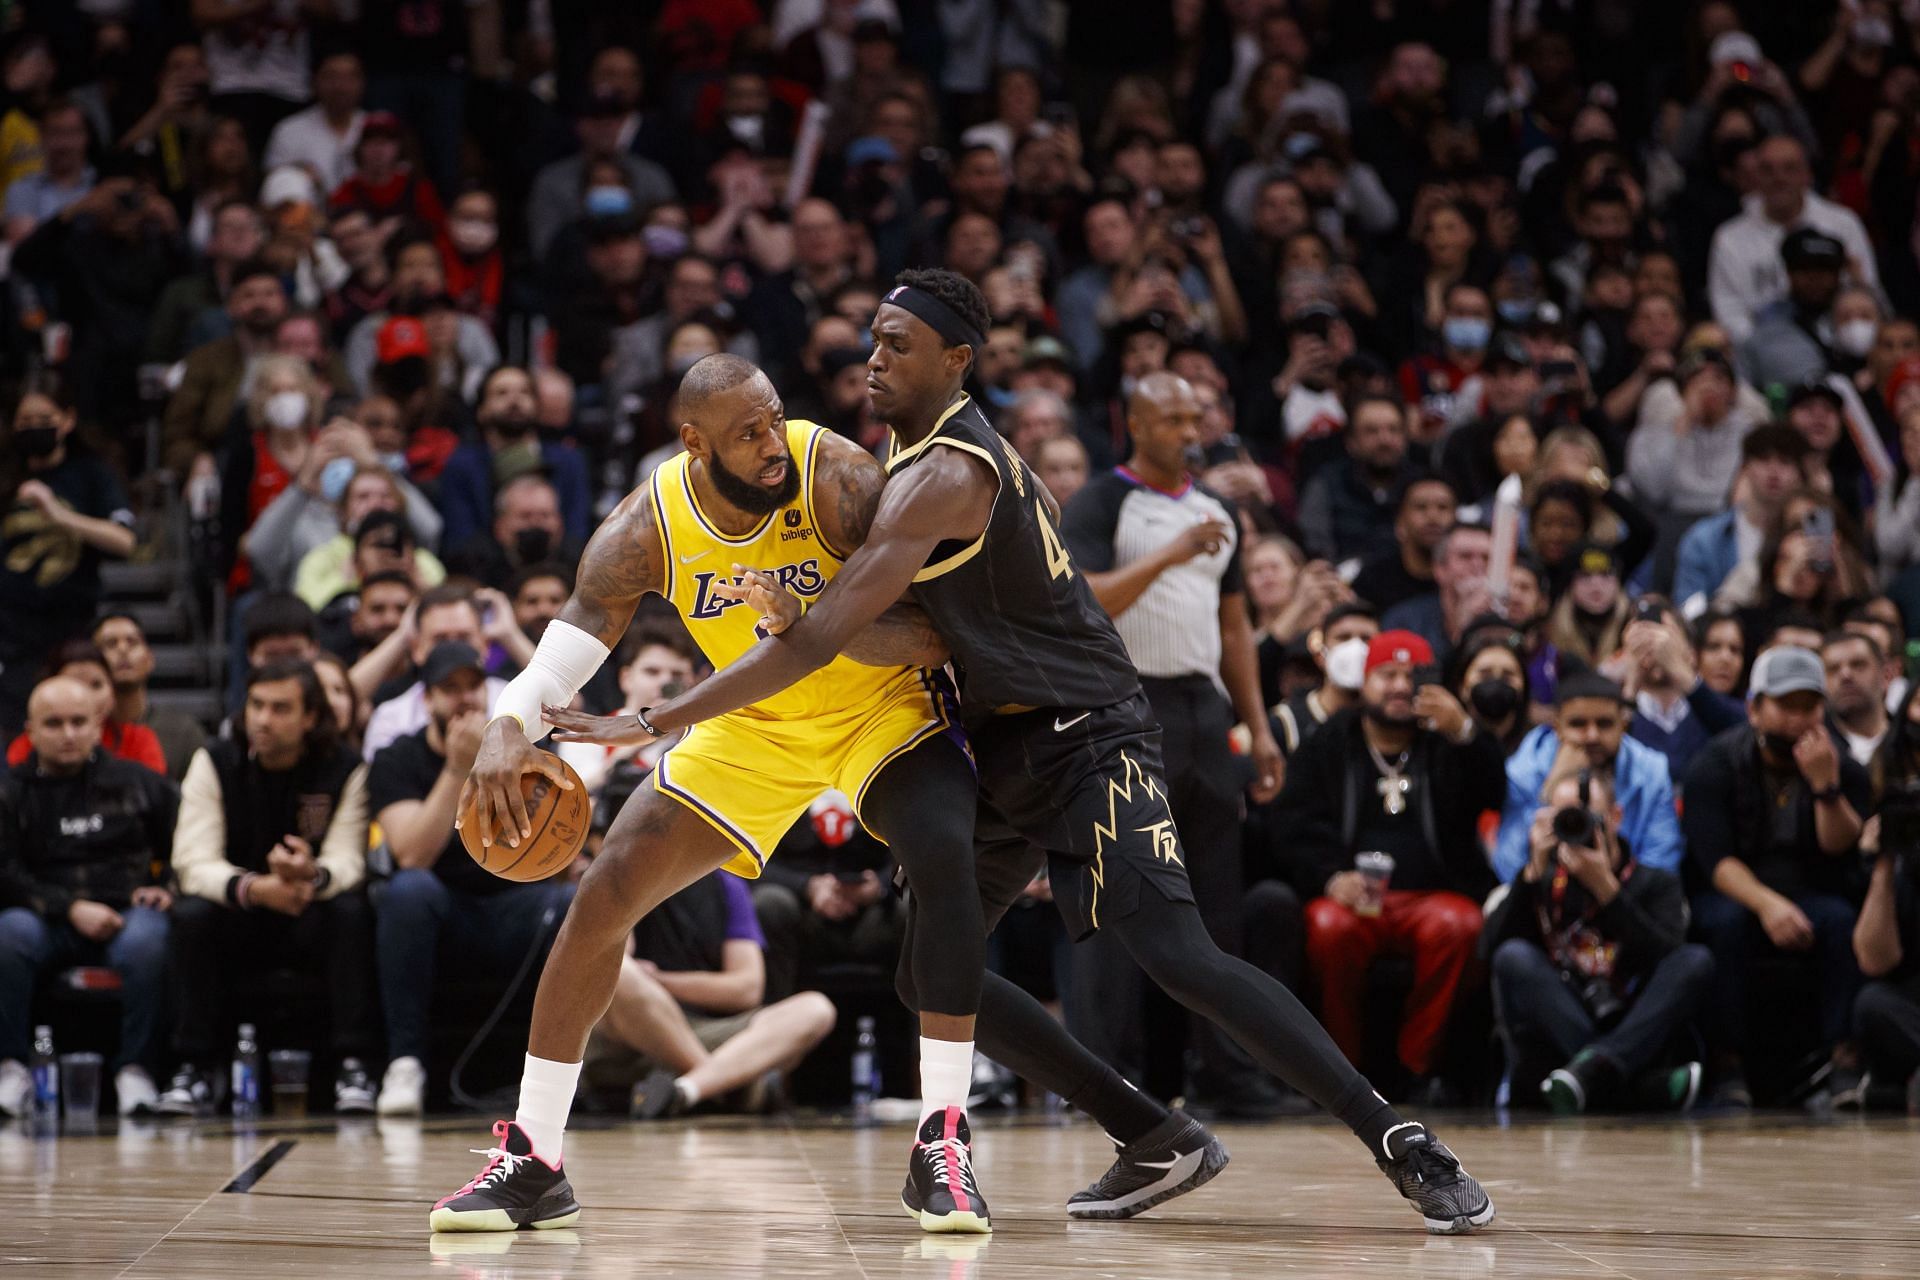 Pascal Siakam #43 of the Toronto Raptors defends against LeBron James #6 of the Los Angeles Lakers